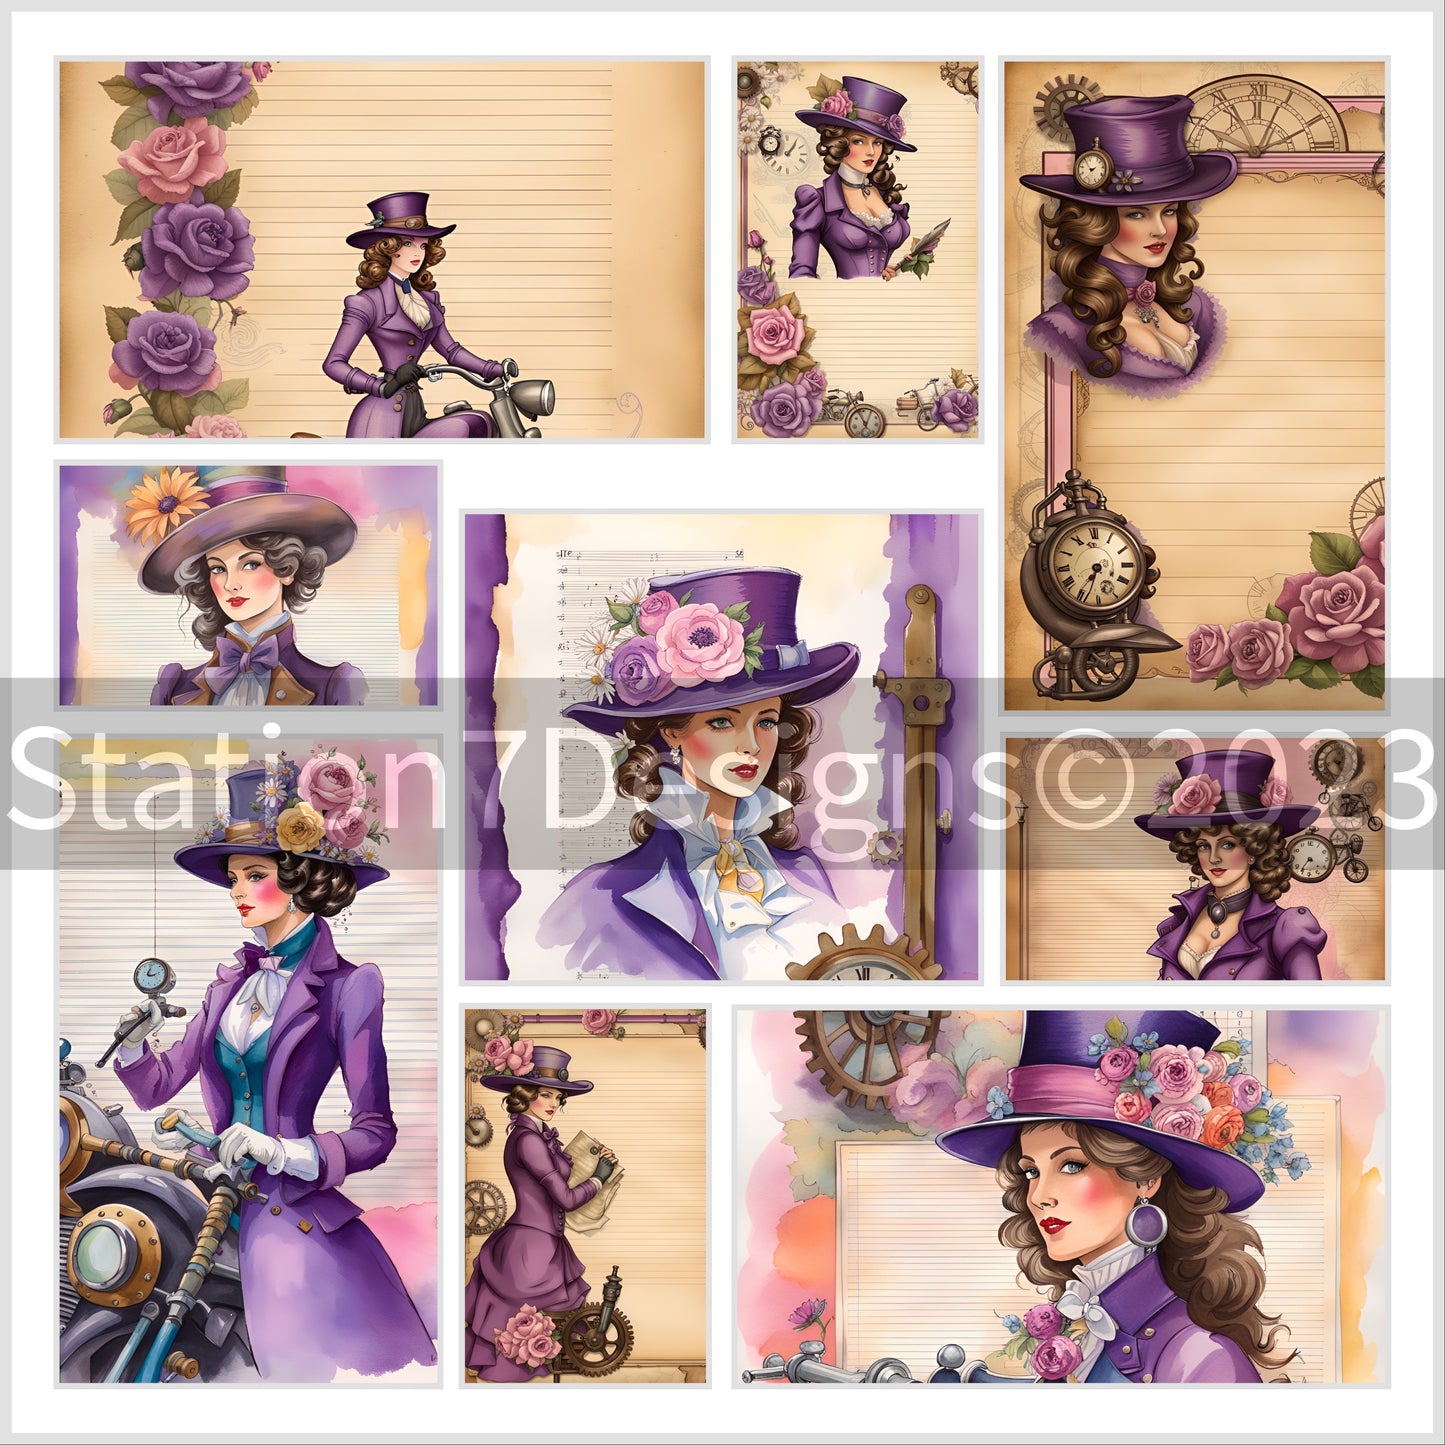 Women Of The Steam Age Series-Purple-Junk Journal Stationery Paper Set of 30 Portrait Prints On Recycled Linen Paper Or Card Stock